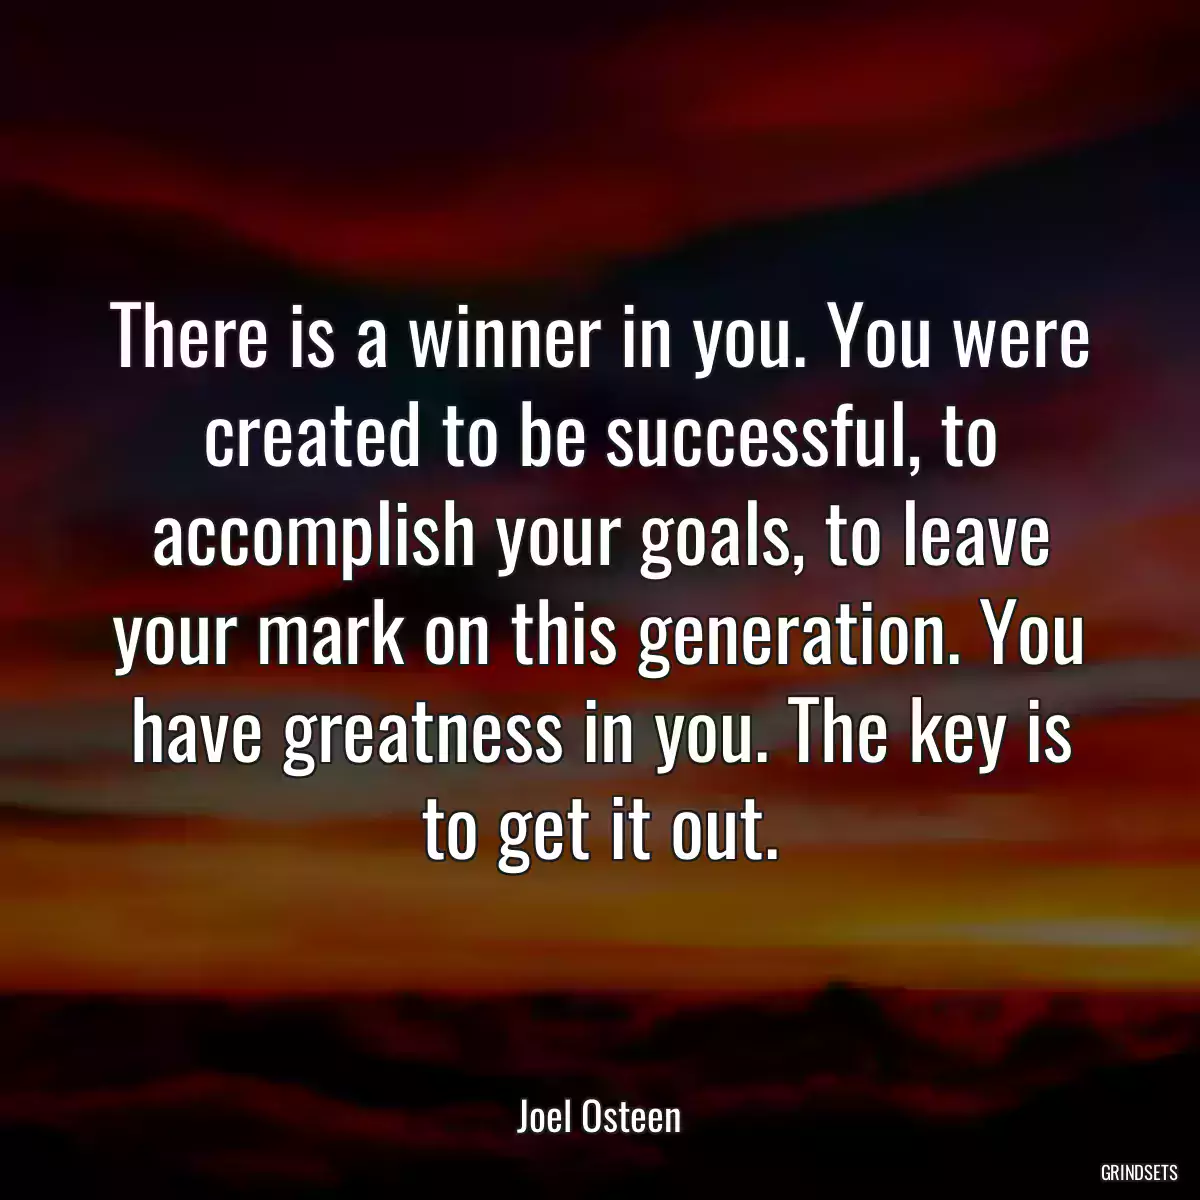 There is a winner in you. You were created to be successful, to accomplish your goals, to leave your mark on this generation. You have greatness in you. The key is to get it out.